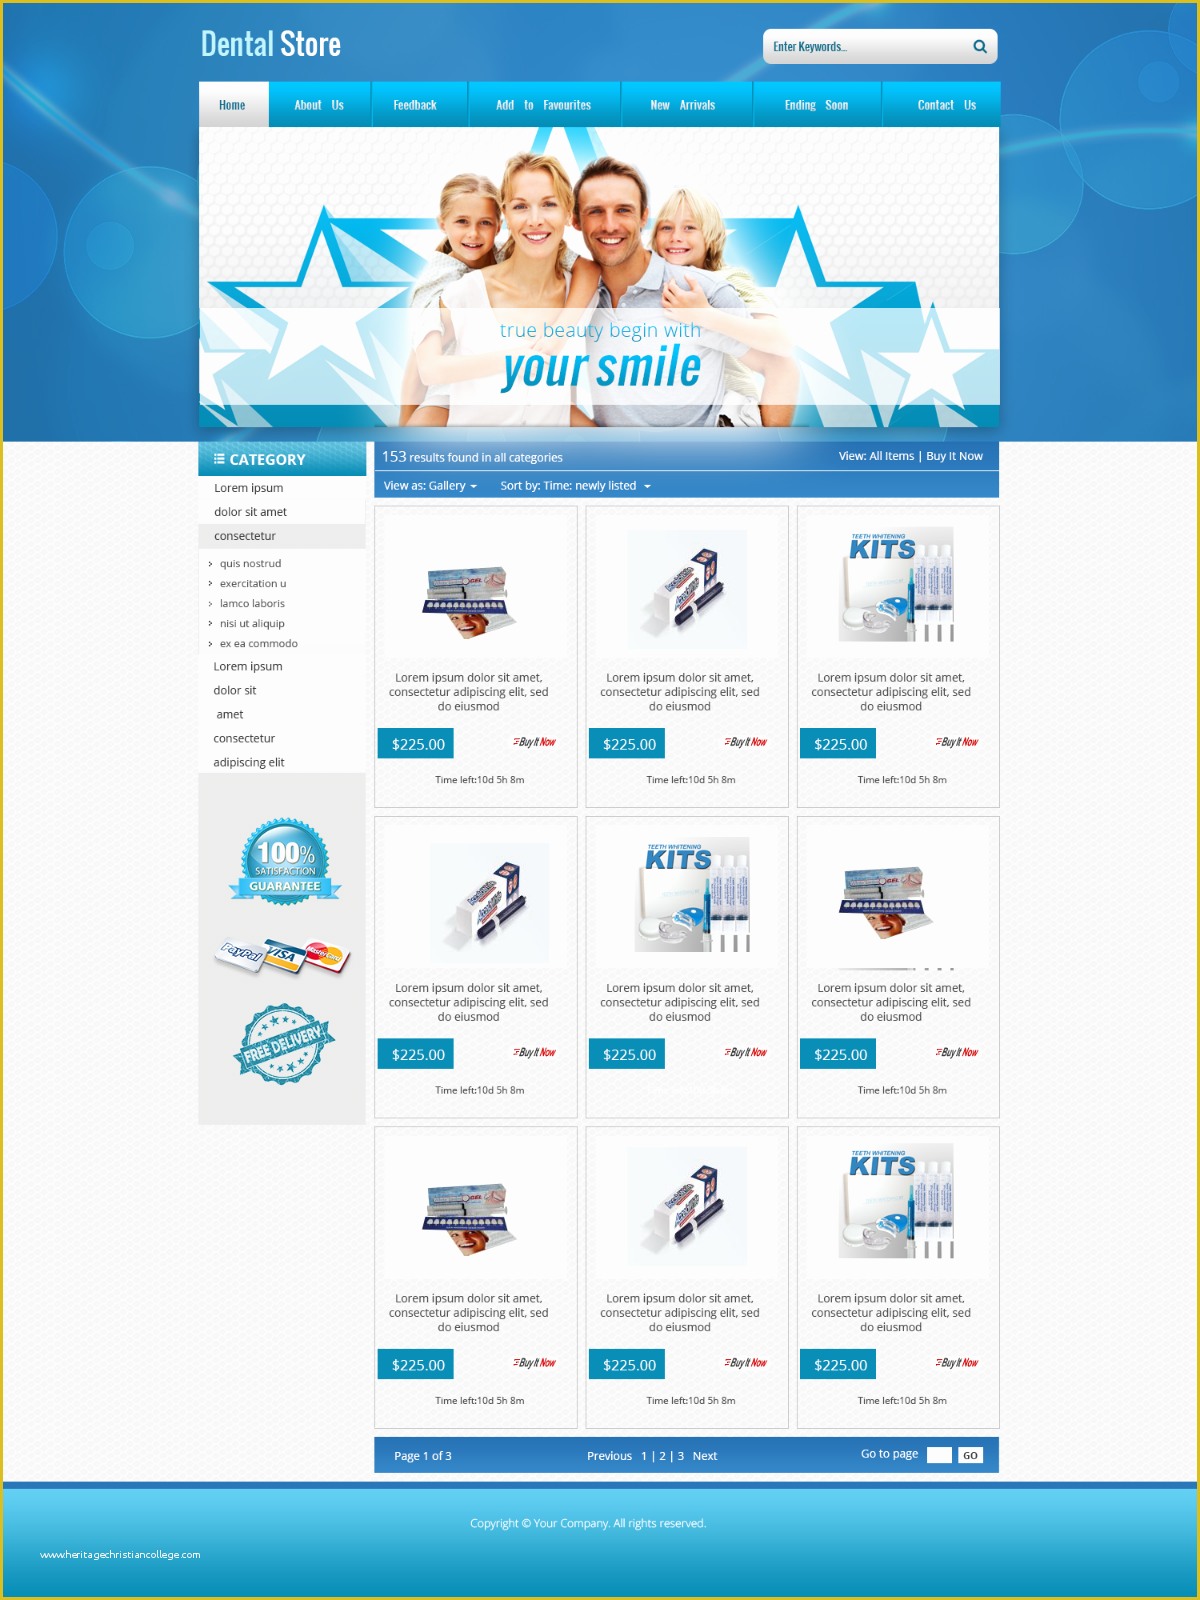 Free Ebay Templates HTML Download Of Professional Ebay Store Shop & Listing Templates with